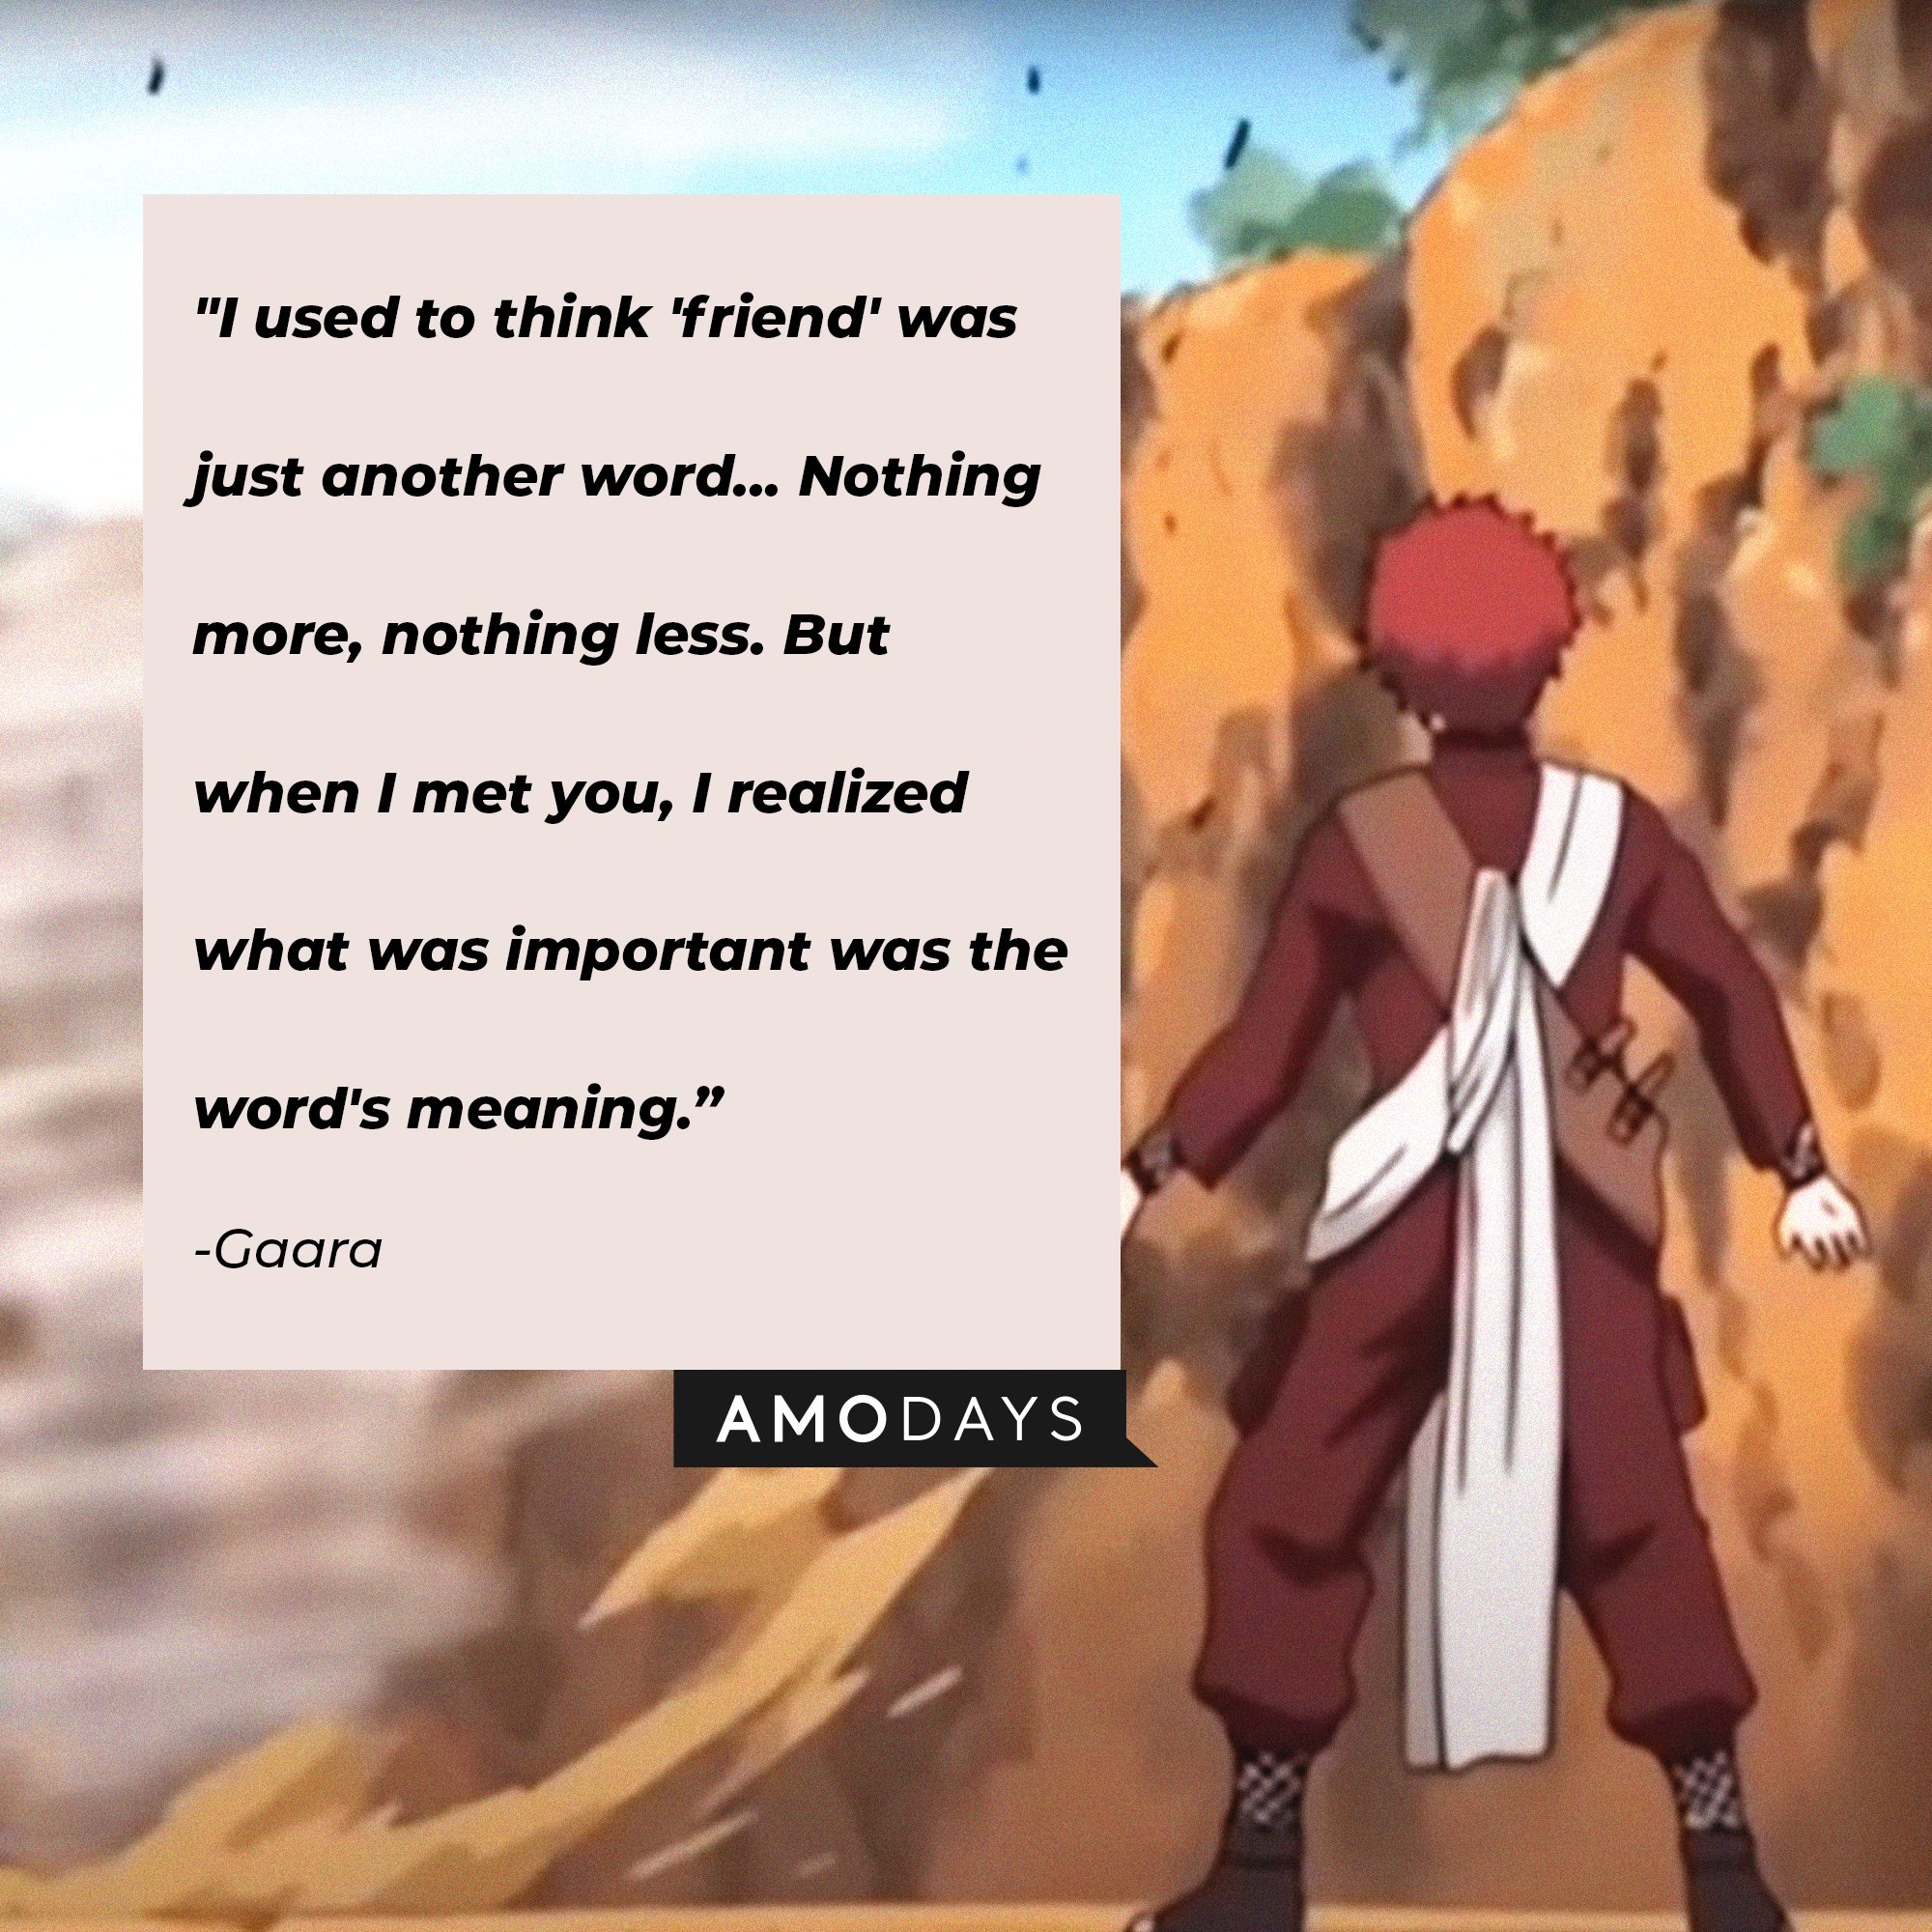 Gaara’s quote: "I used to think 'friend' was just another word... Nothing more, nothing less. But when I met you, I realized what was important was the word's meaning." | Image: AmoDays